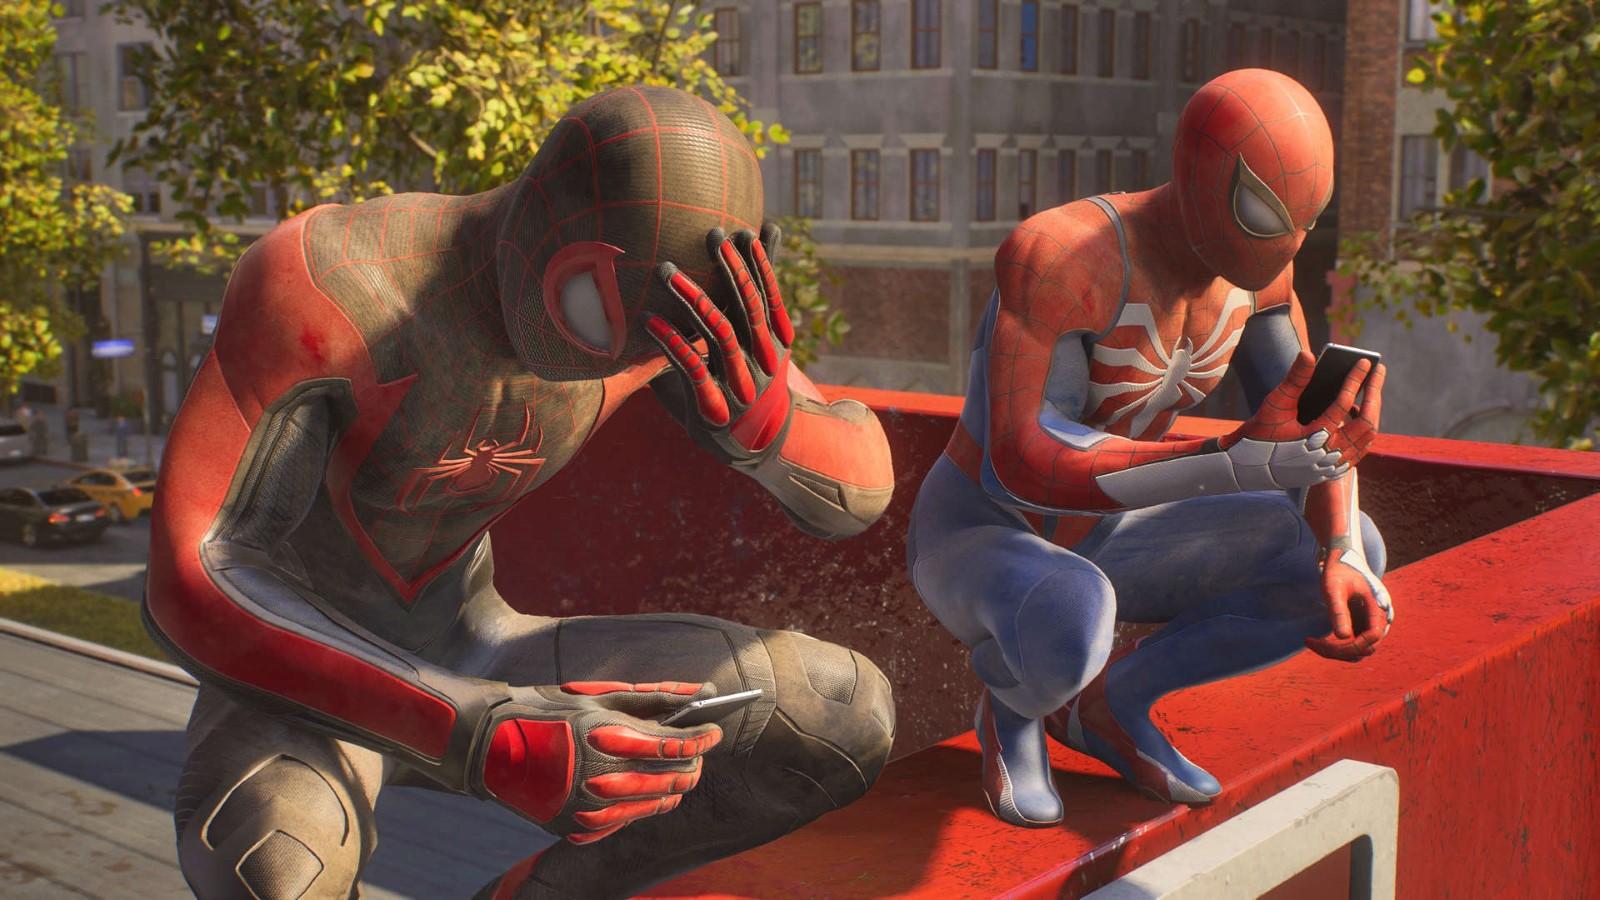 Spider-Man 2 players collectively groan as devs “Rick Roll” them